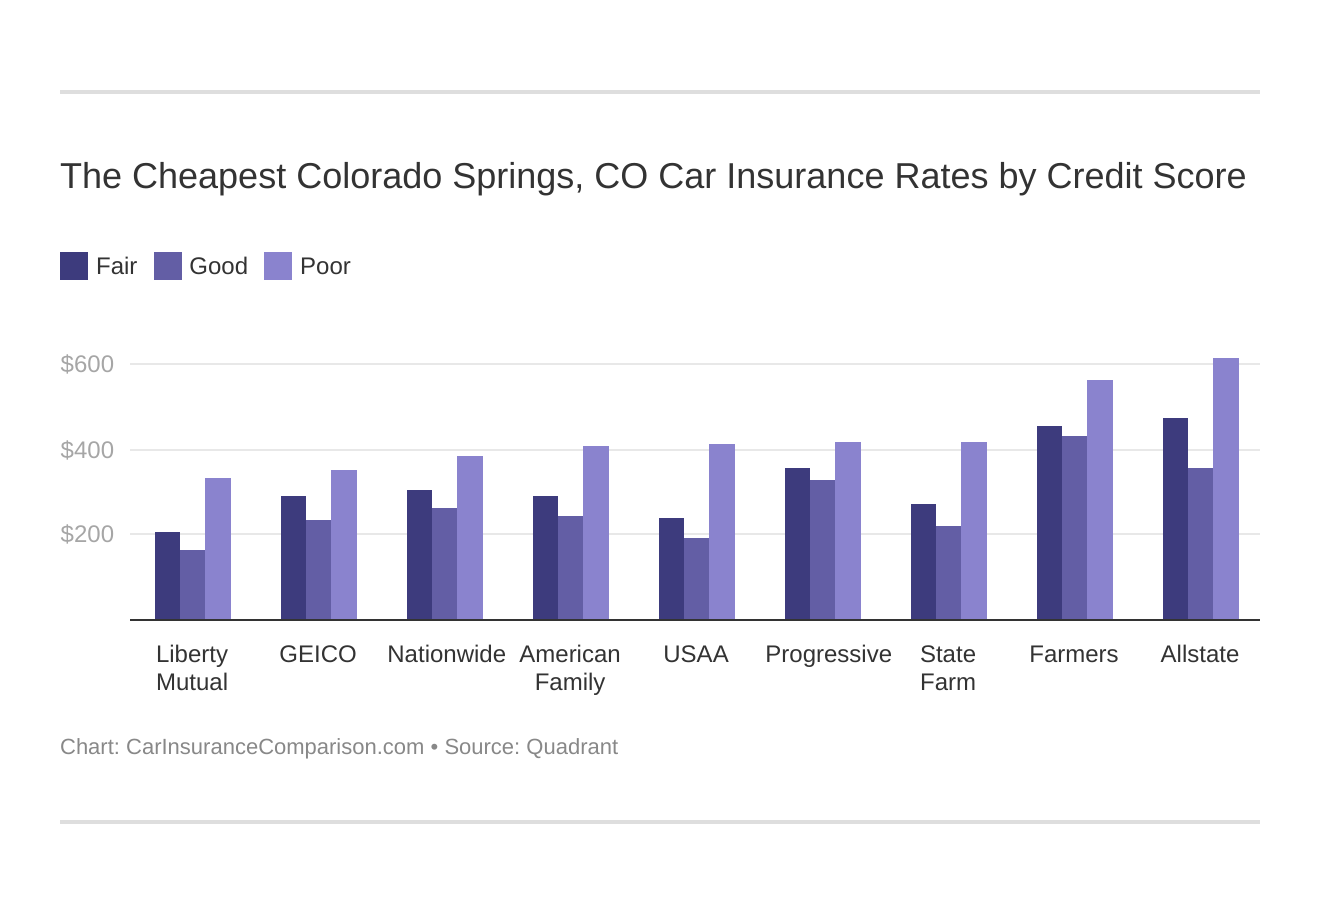 The Cheapest Colorado Springs, CO Car Insurance Rates by Credit Score